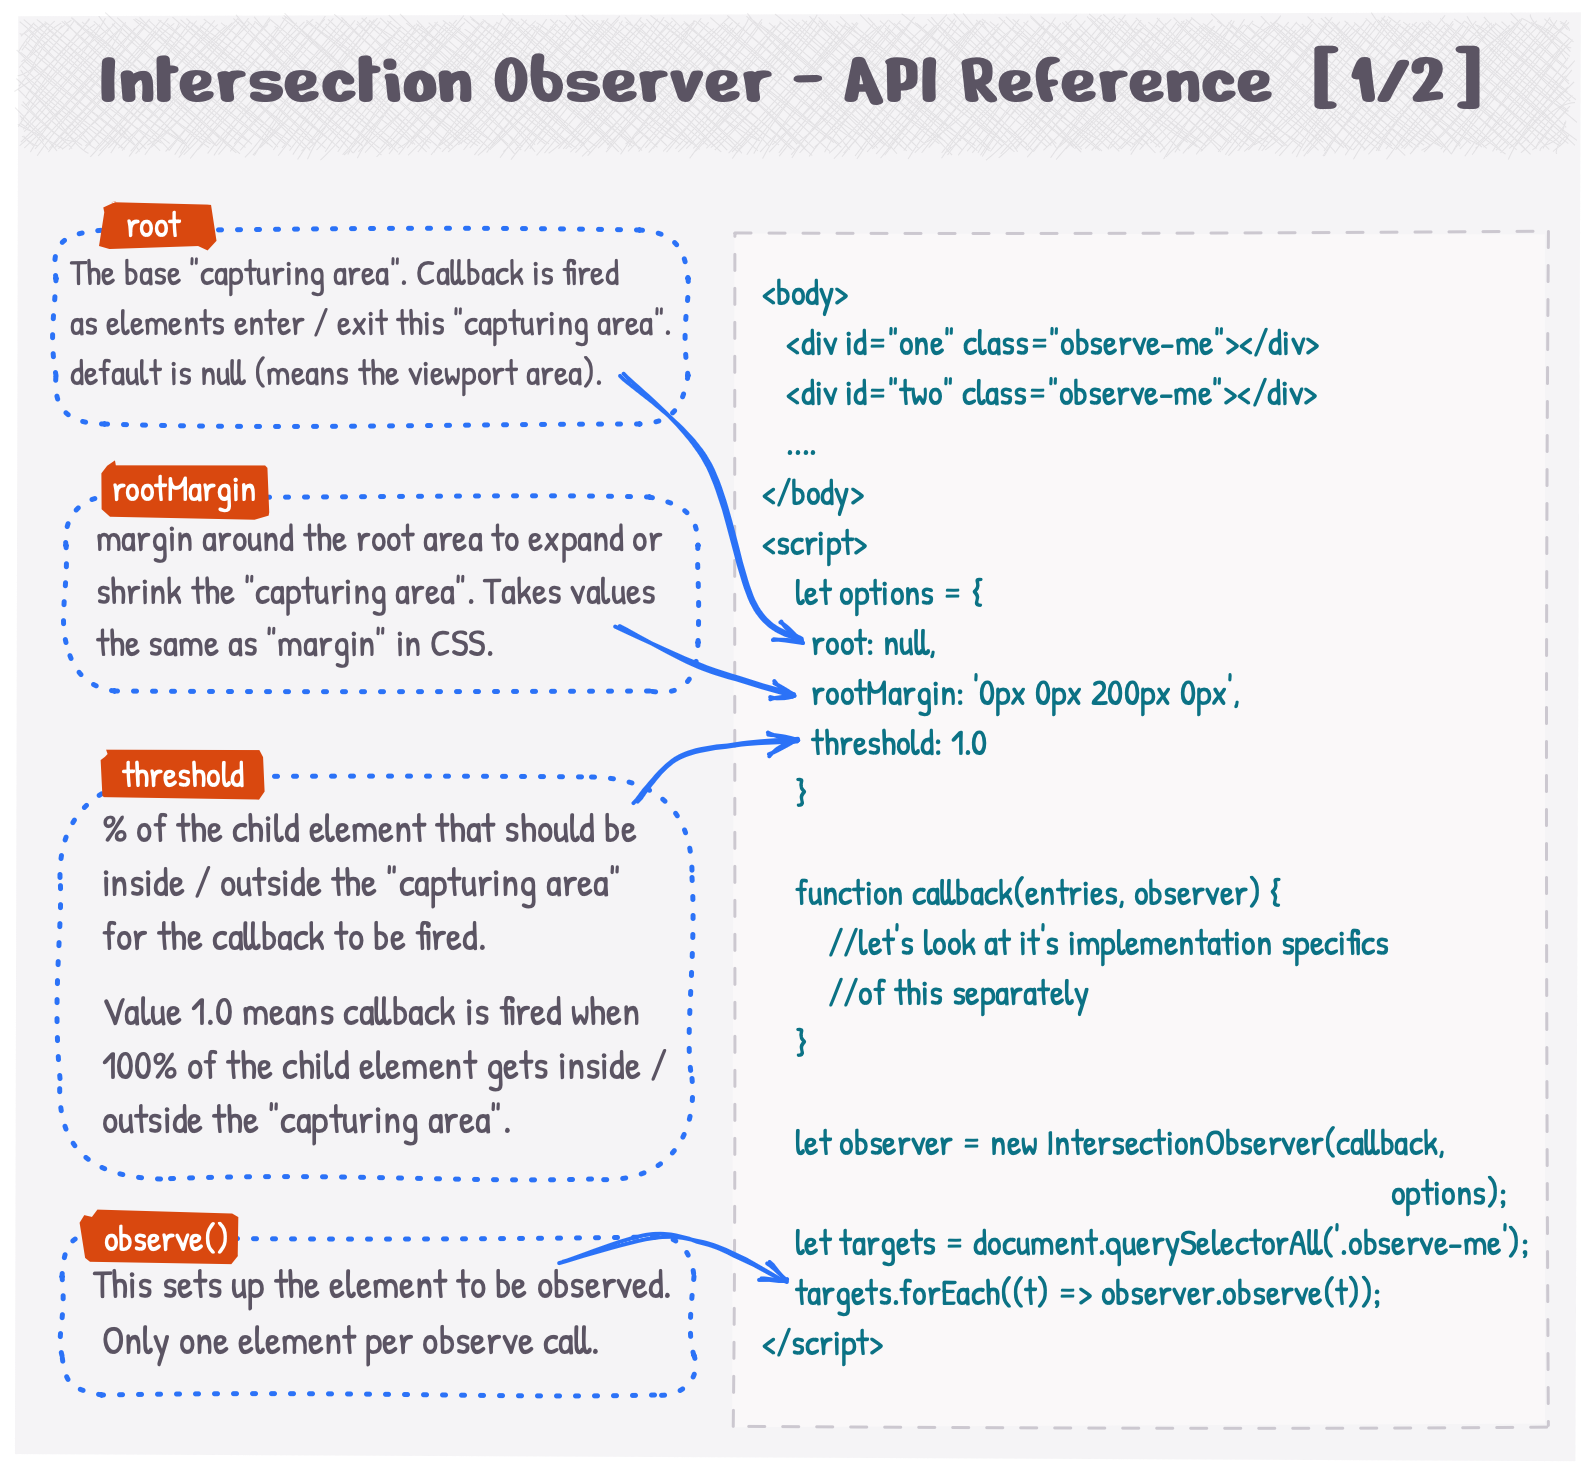 Intersection Observer - API Reference - 1